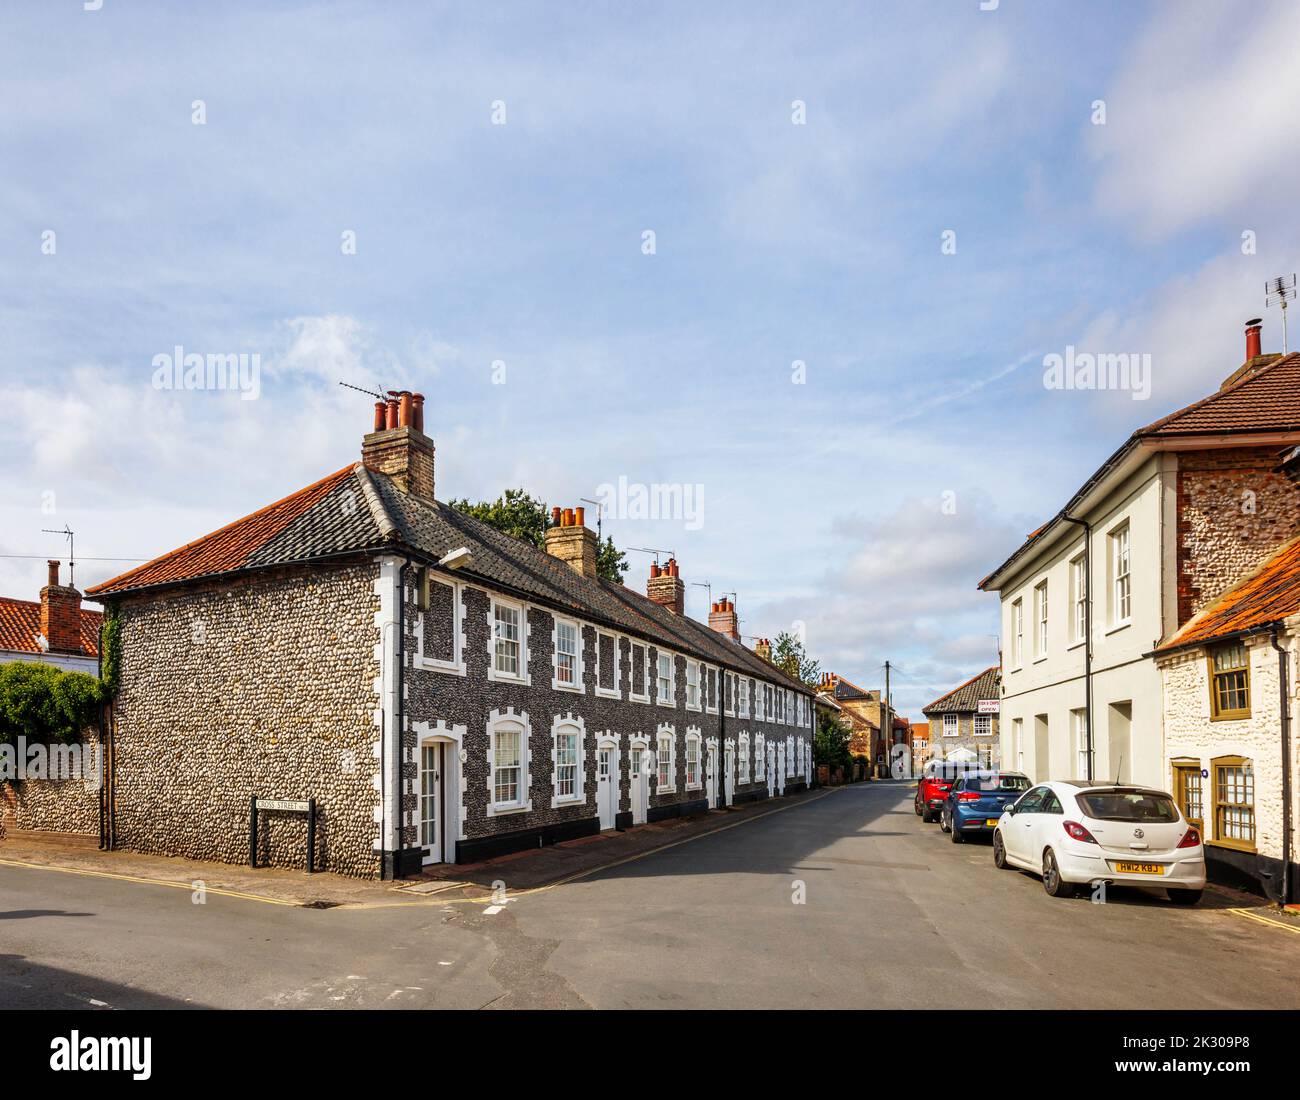 Terrace of local architectural style houses with flint stone walls in Holt, a small historic Georgian market town in north Norfolk, England Stock Photo